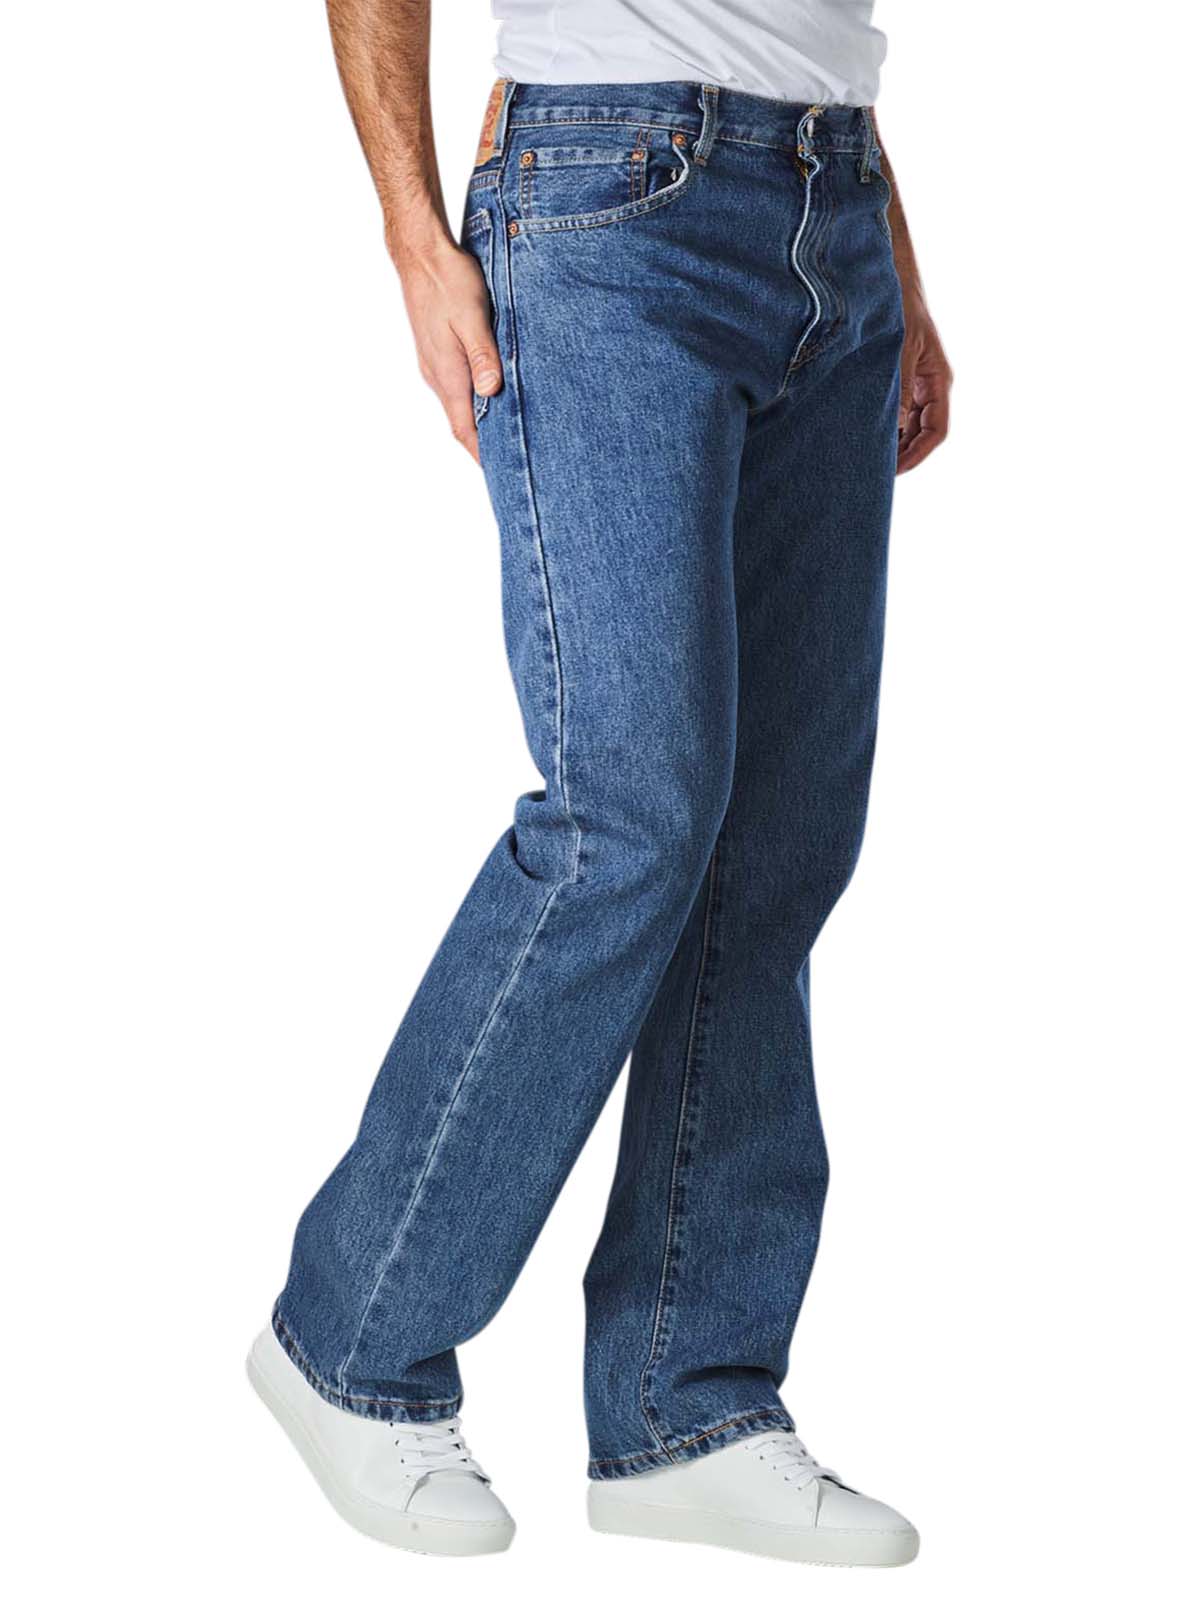 Levi's 517 Jeans Bootcut Fit med sw Levi's Men's Jeans | Free Shipping on   - SIMPLY LOOK GOOD